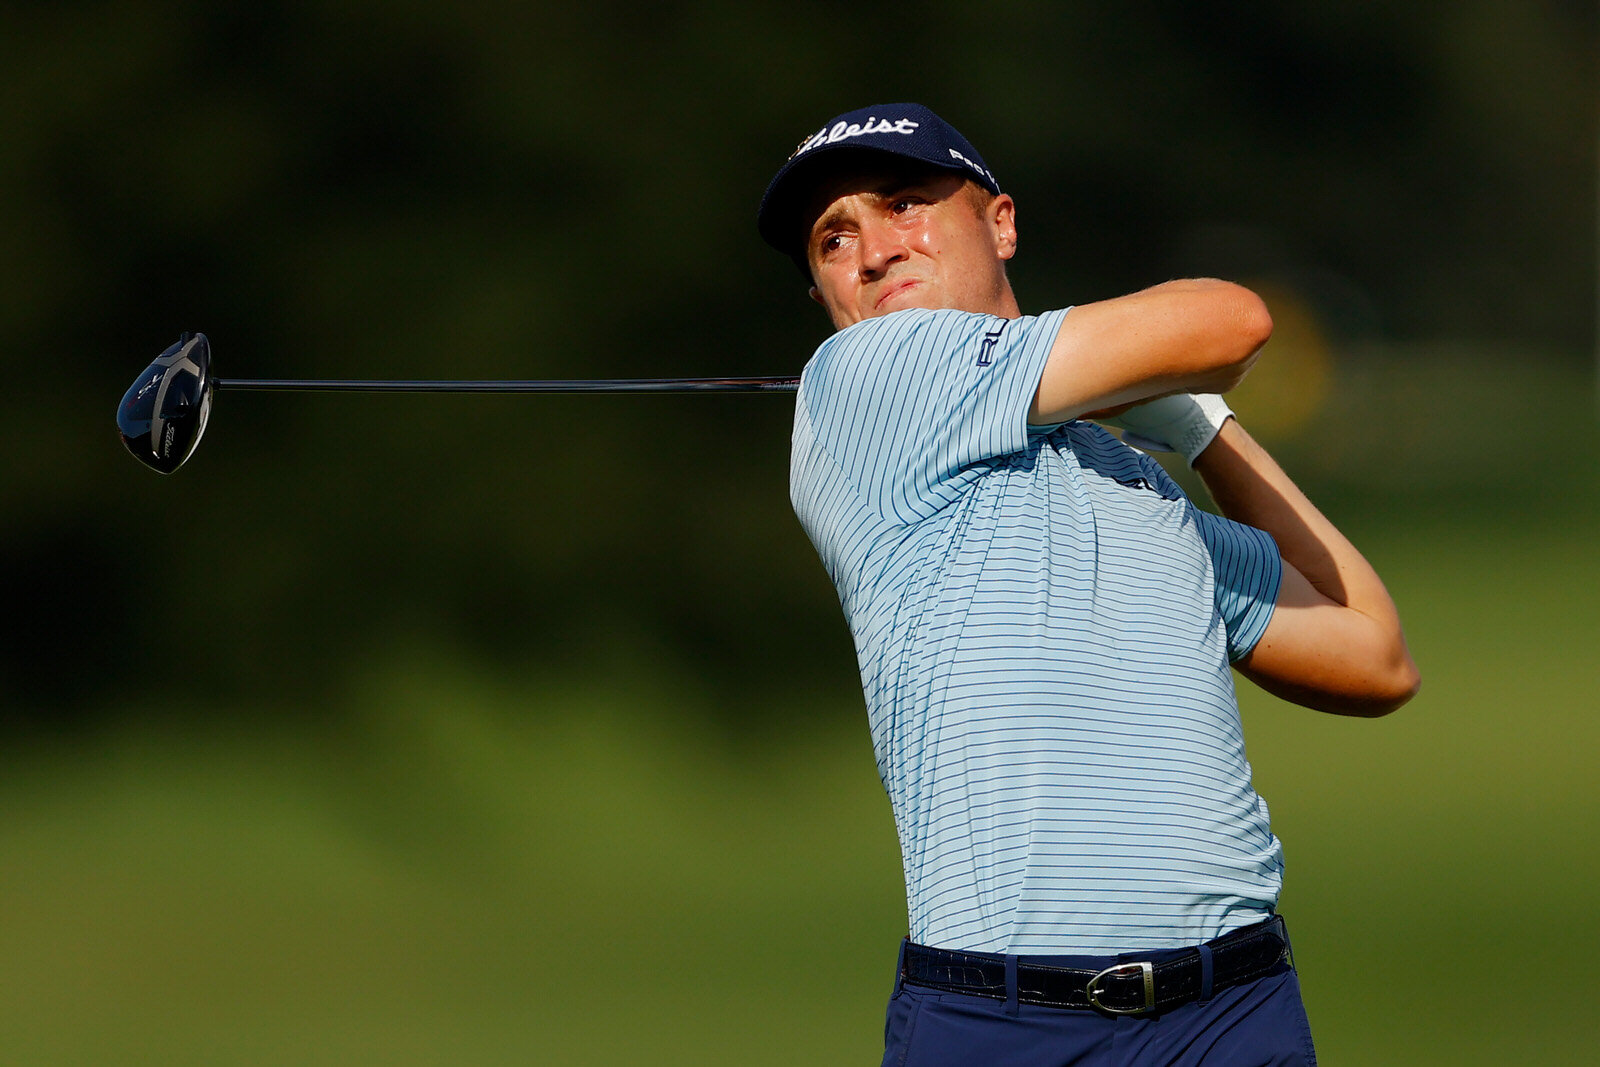  ATLANTA, GEORGIA - SEPTEMBER 05: Justin Thomas of the United States plays his shot from the 16th tee during the second round of the TOUR Championship at East Lake Golf Club on September 05, 2020 in Atlanta, Georgia. (Photo by Kevin C. Cox/Getty Imag